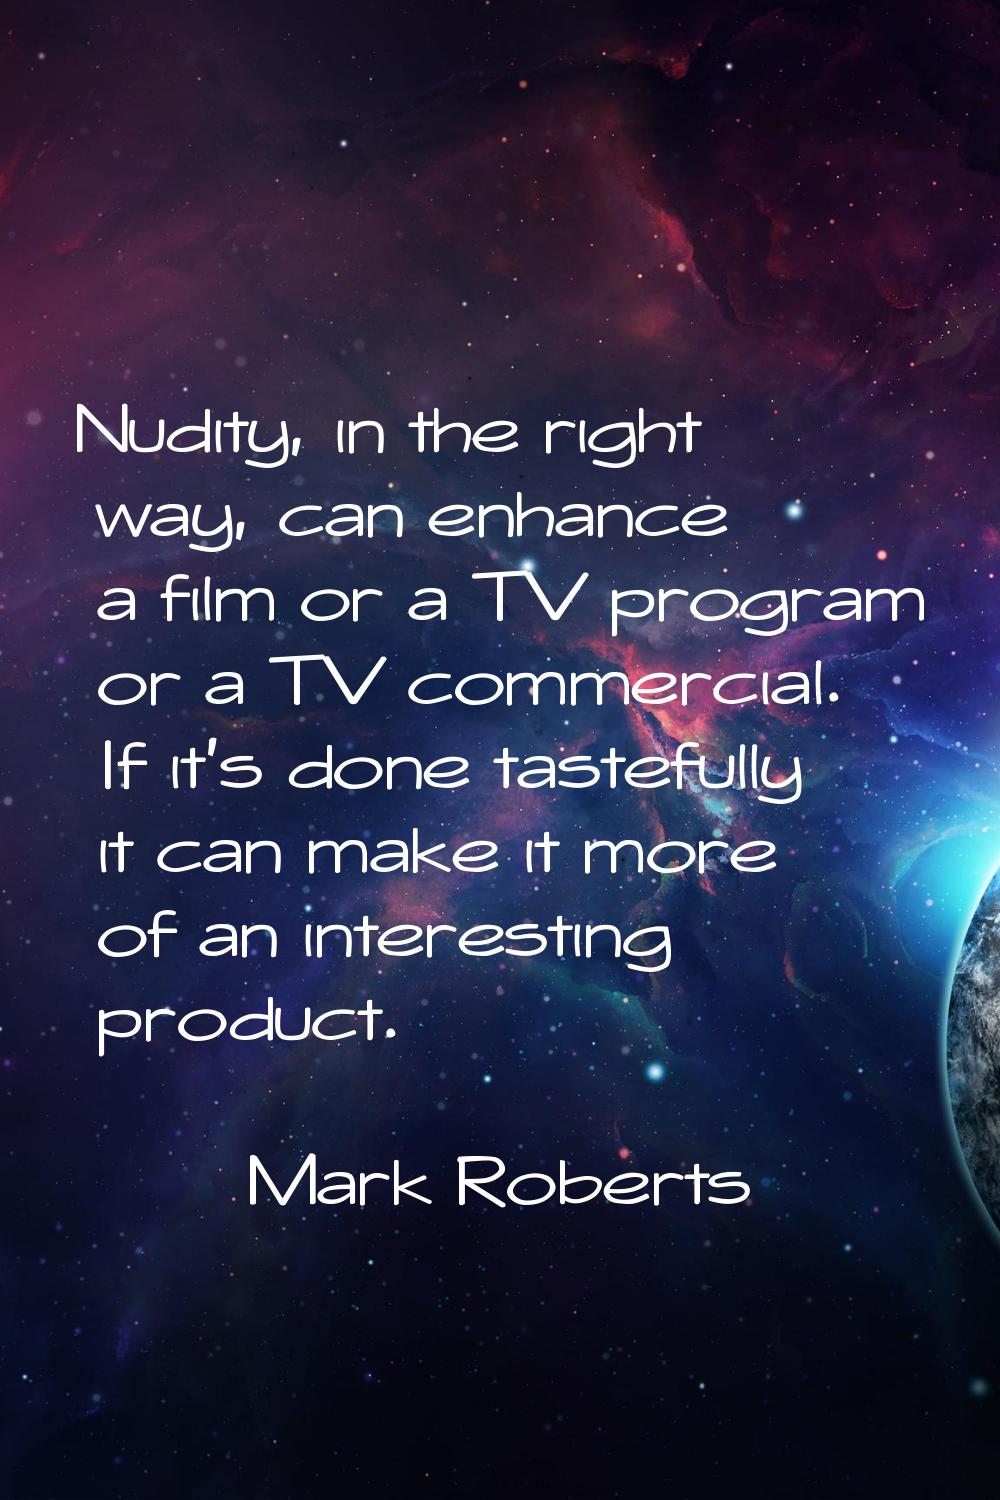 Nudity, in the right way, can enhance a film or a TV program or a TV commercial. If it's done taste